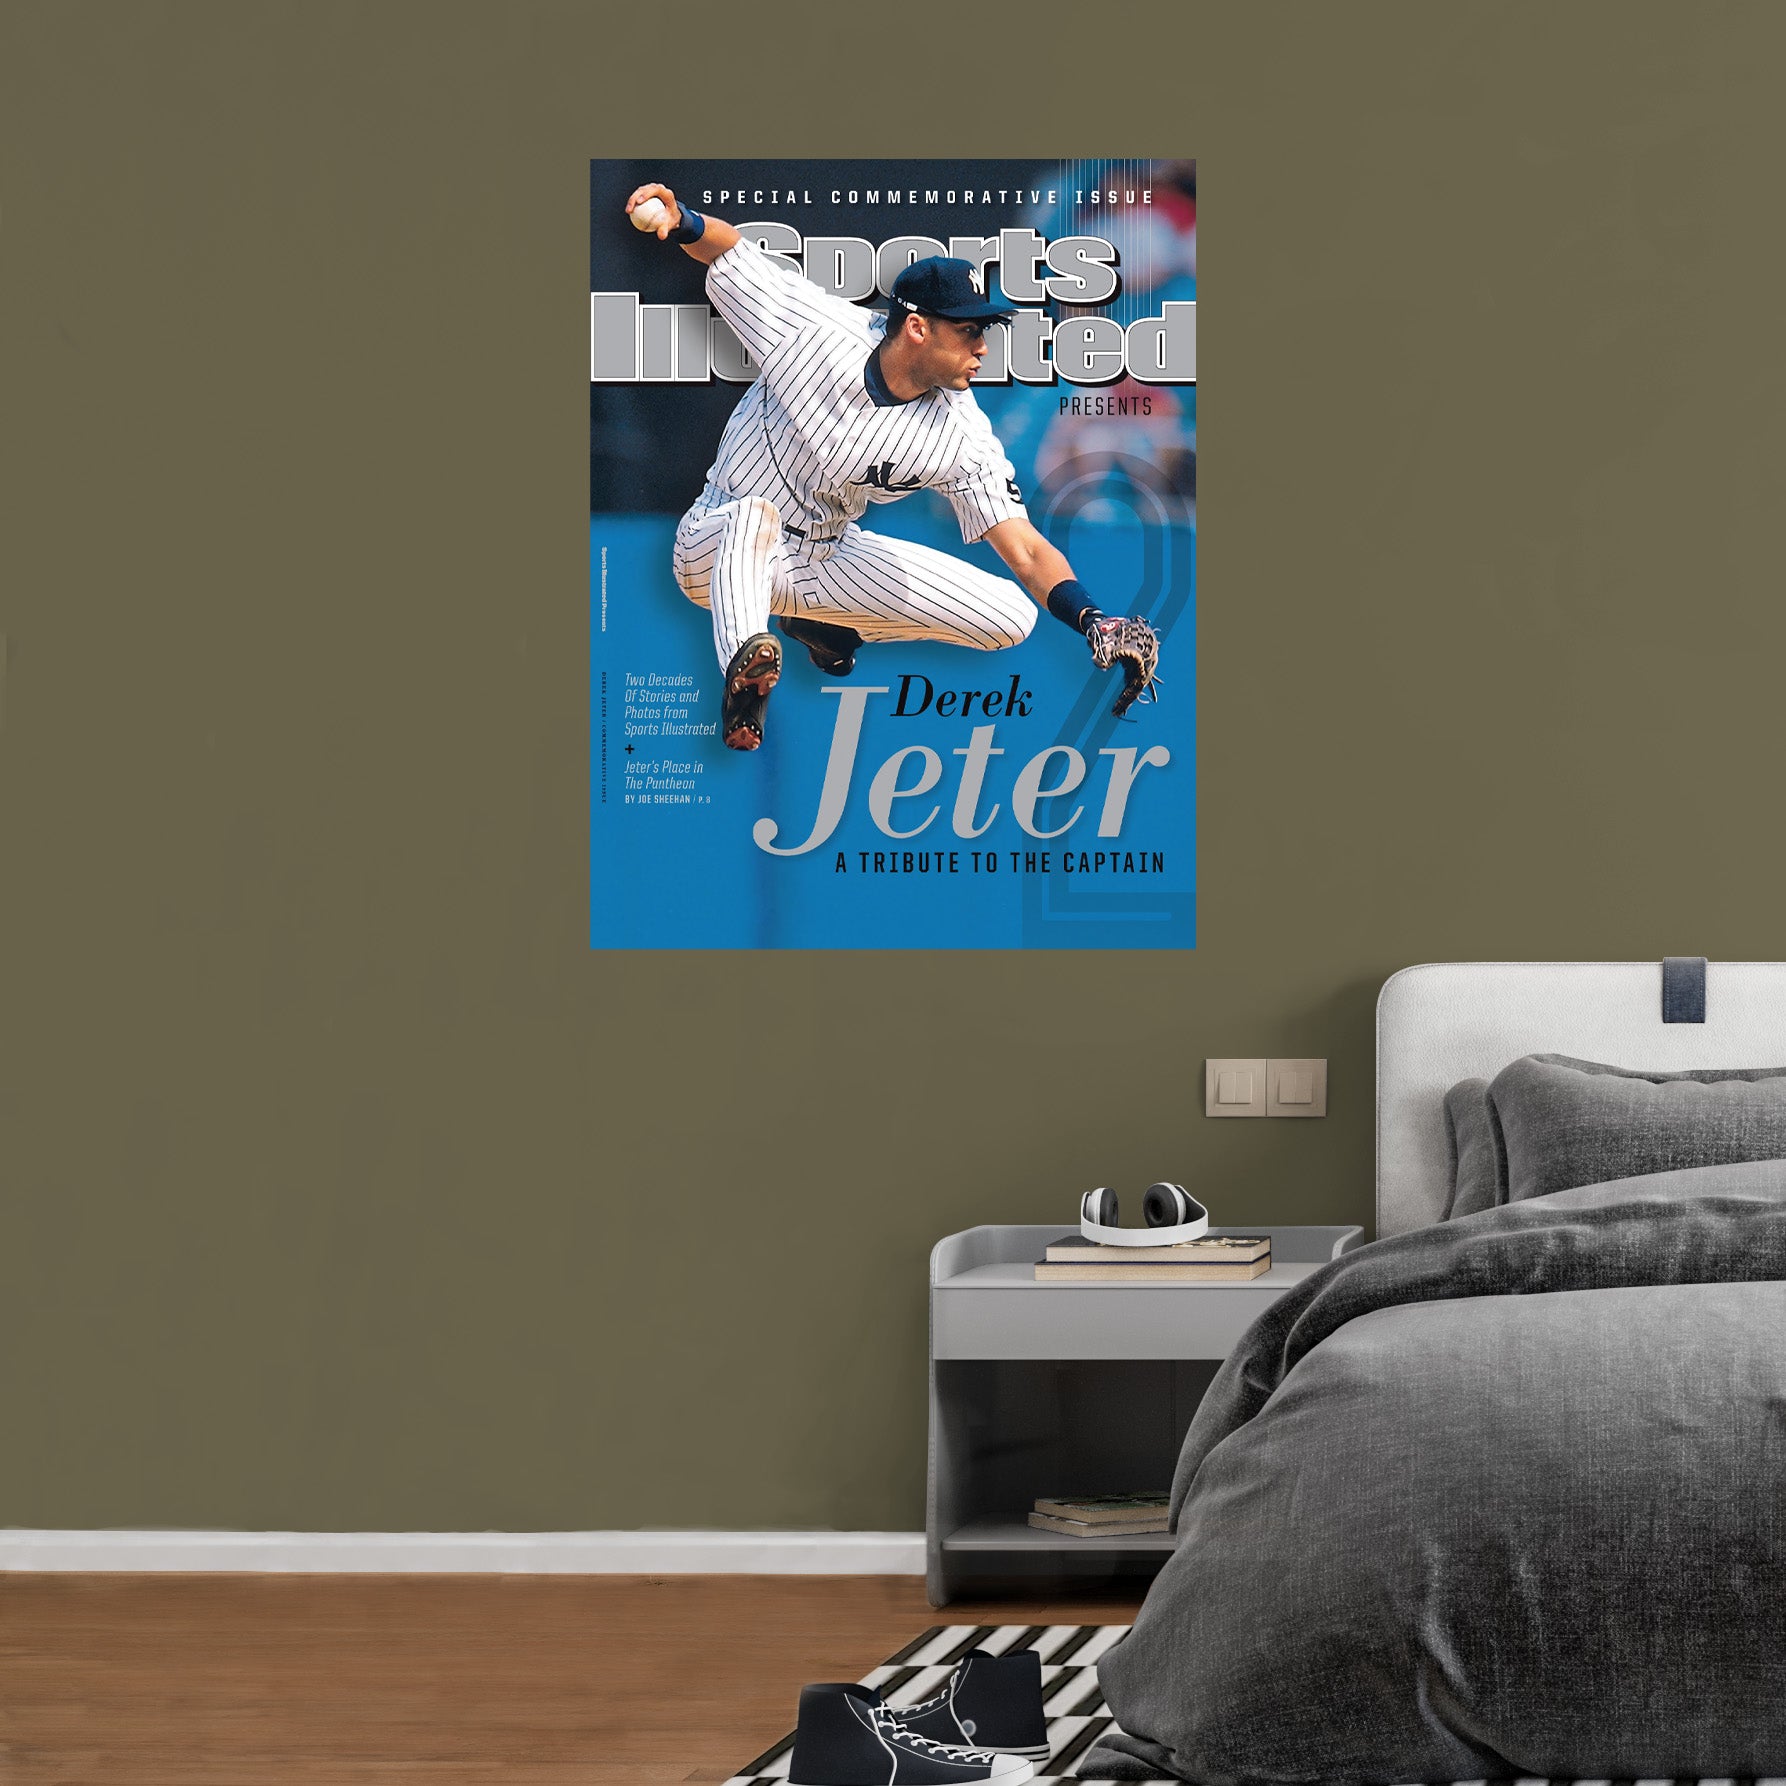 Fathead Derek Jeter New York Yankees Farewell Giant Removable Wall Decal